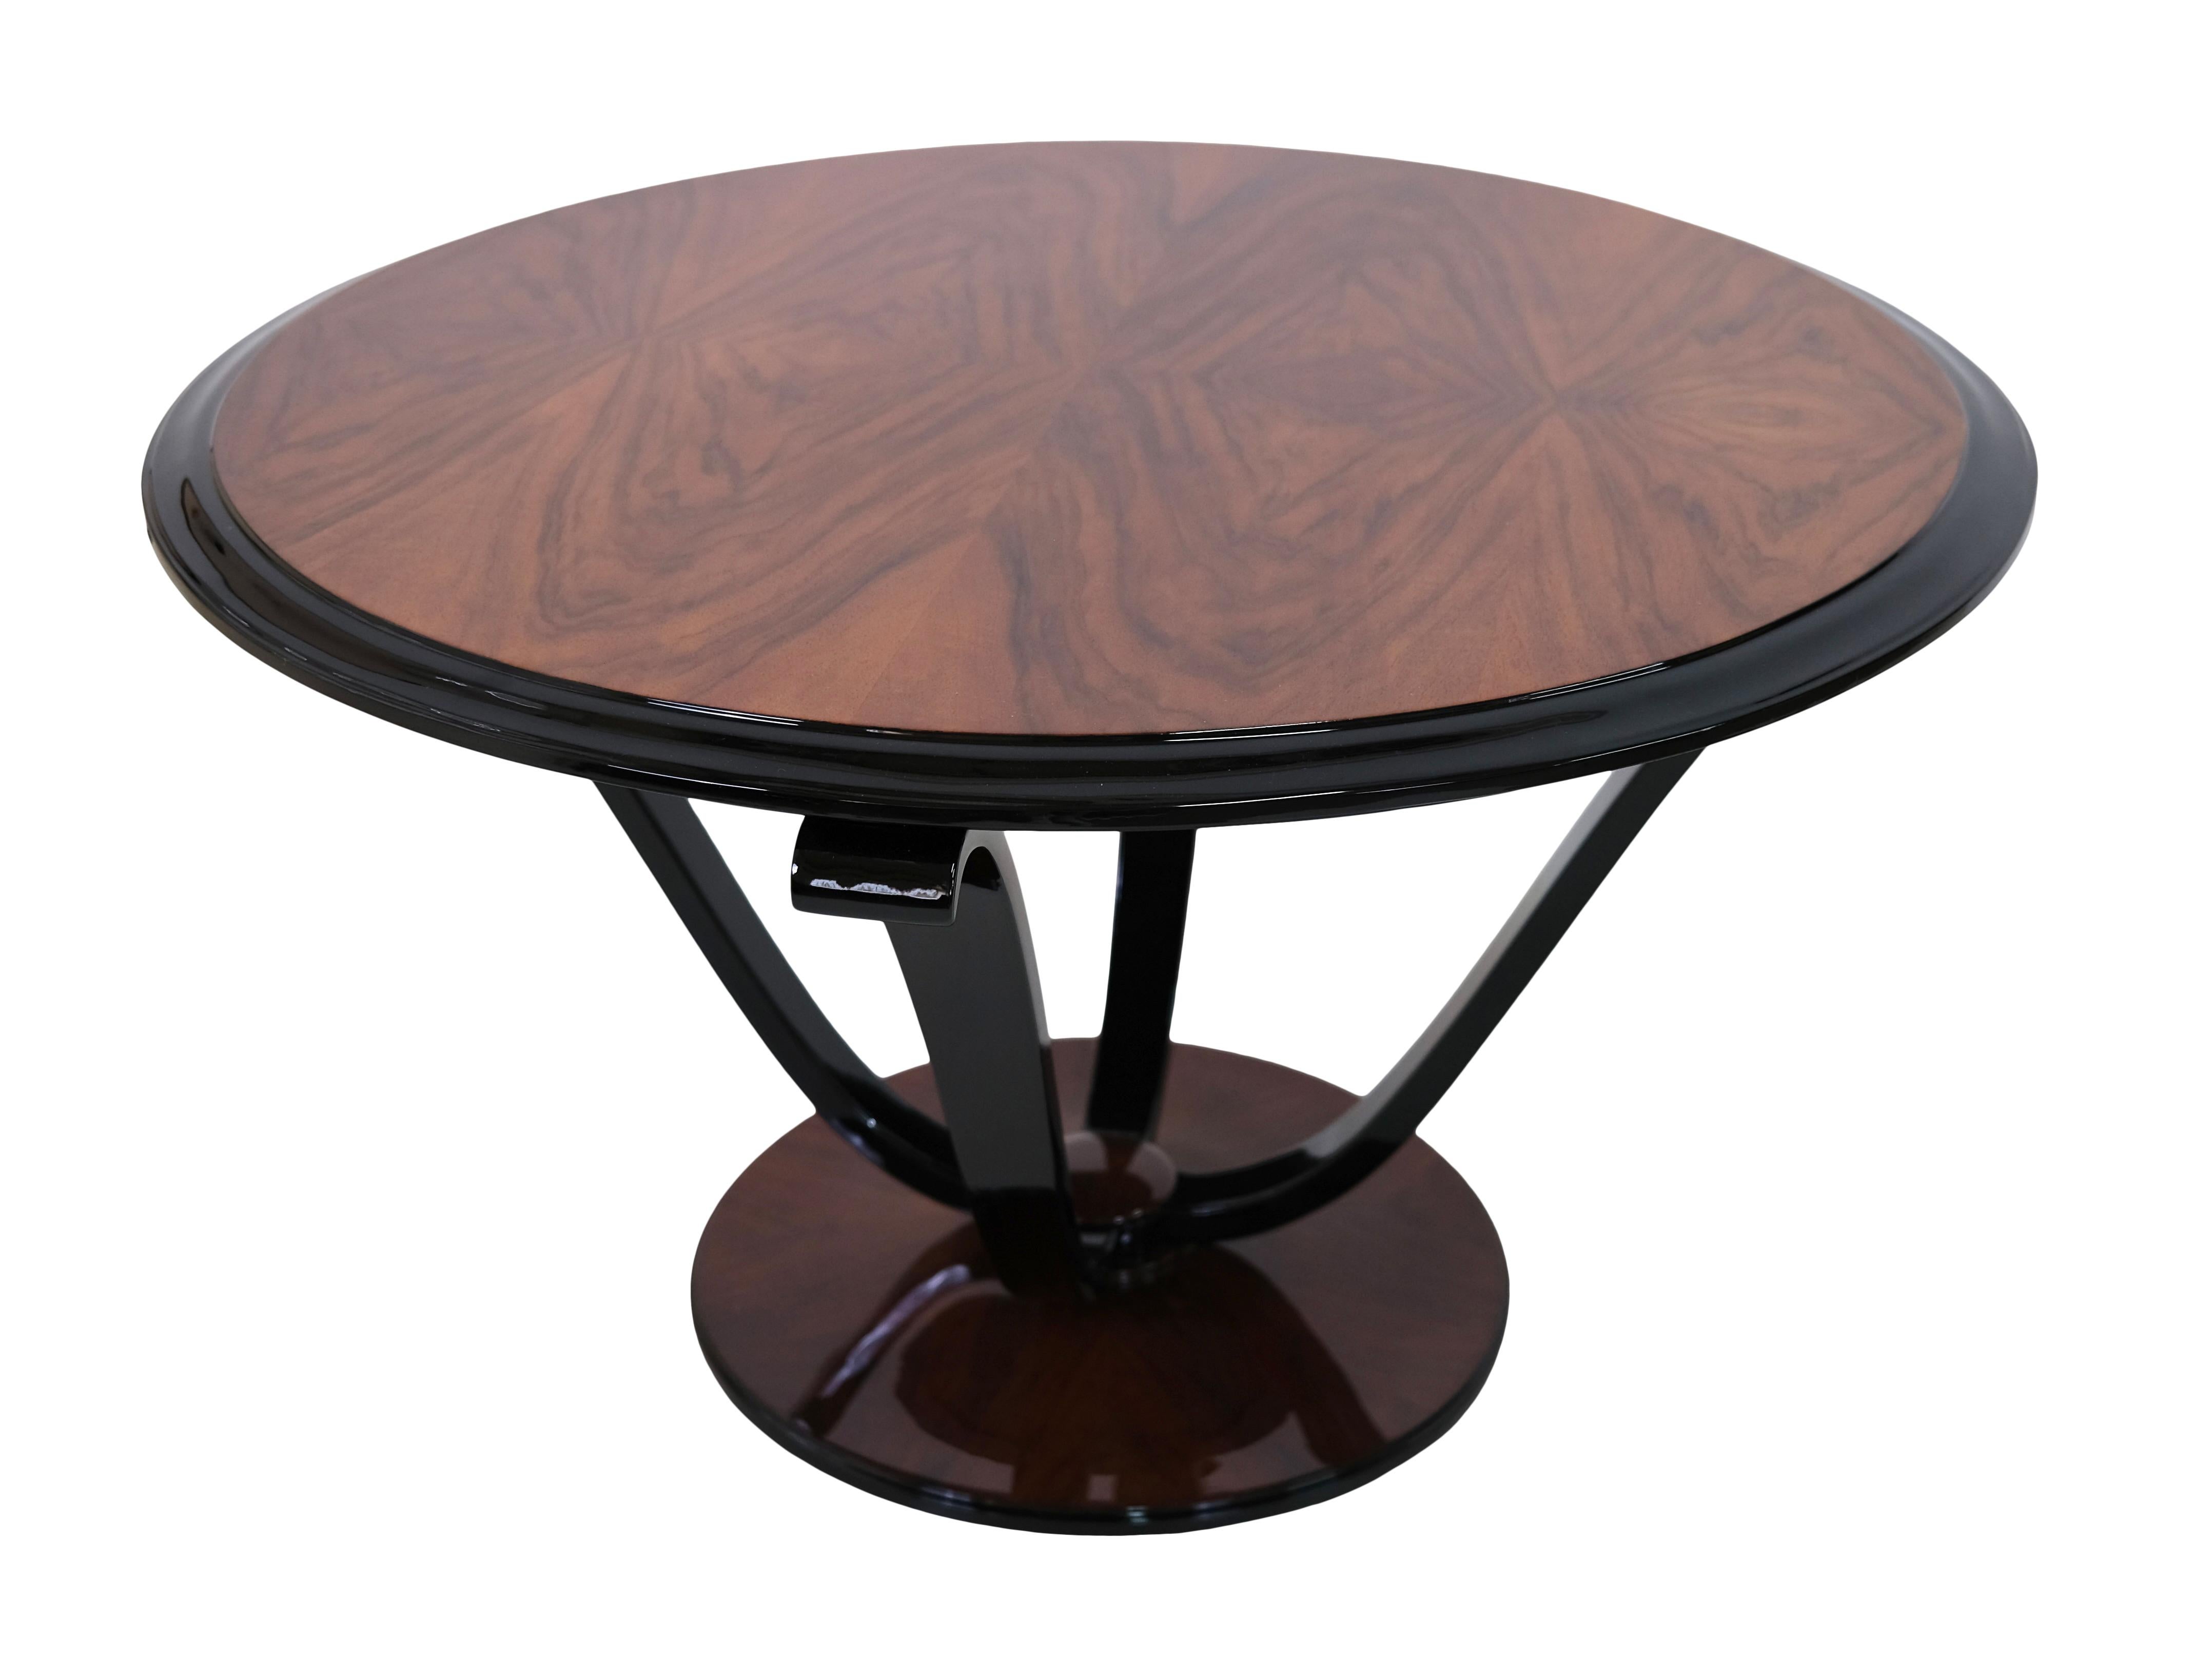 Blackened French 1930s Art Deco Side Table with Nutwood Veneer and Black Lacquer For Sale